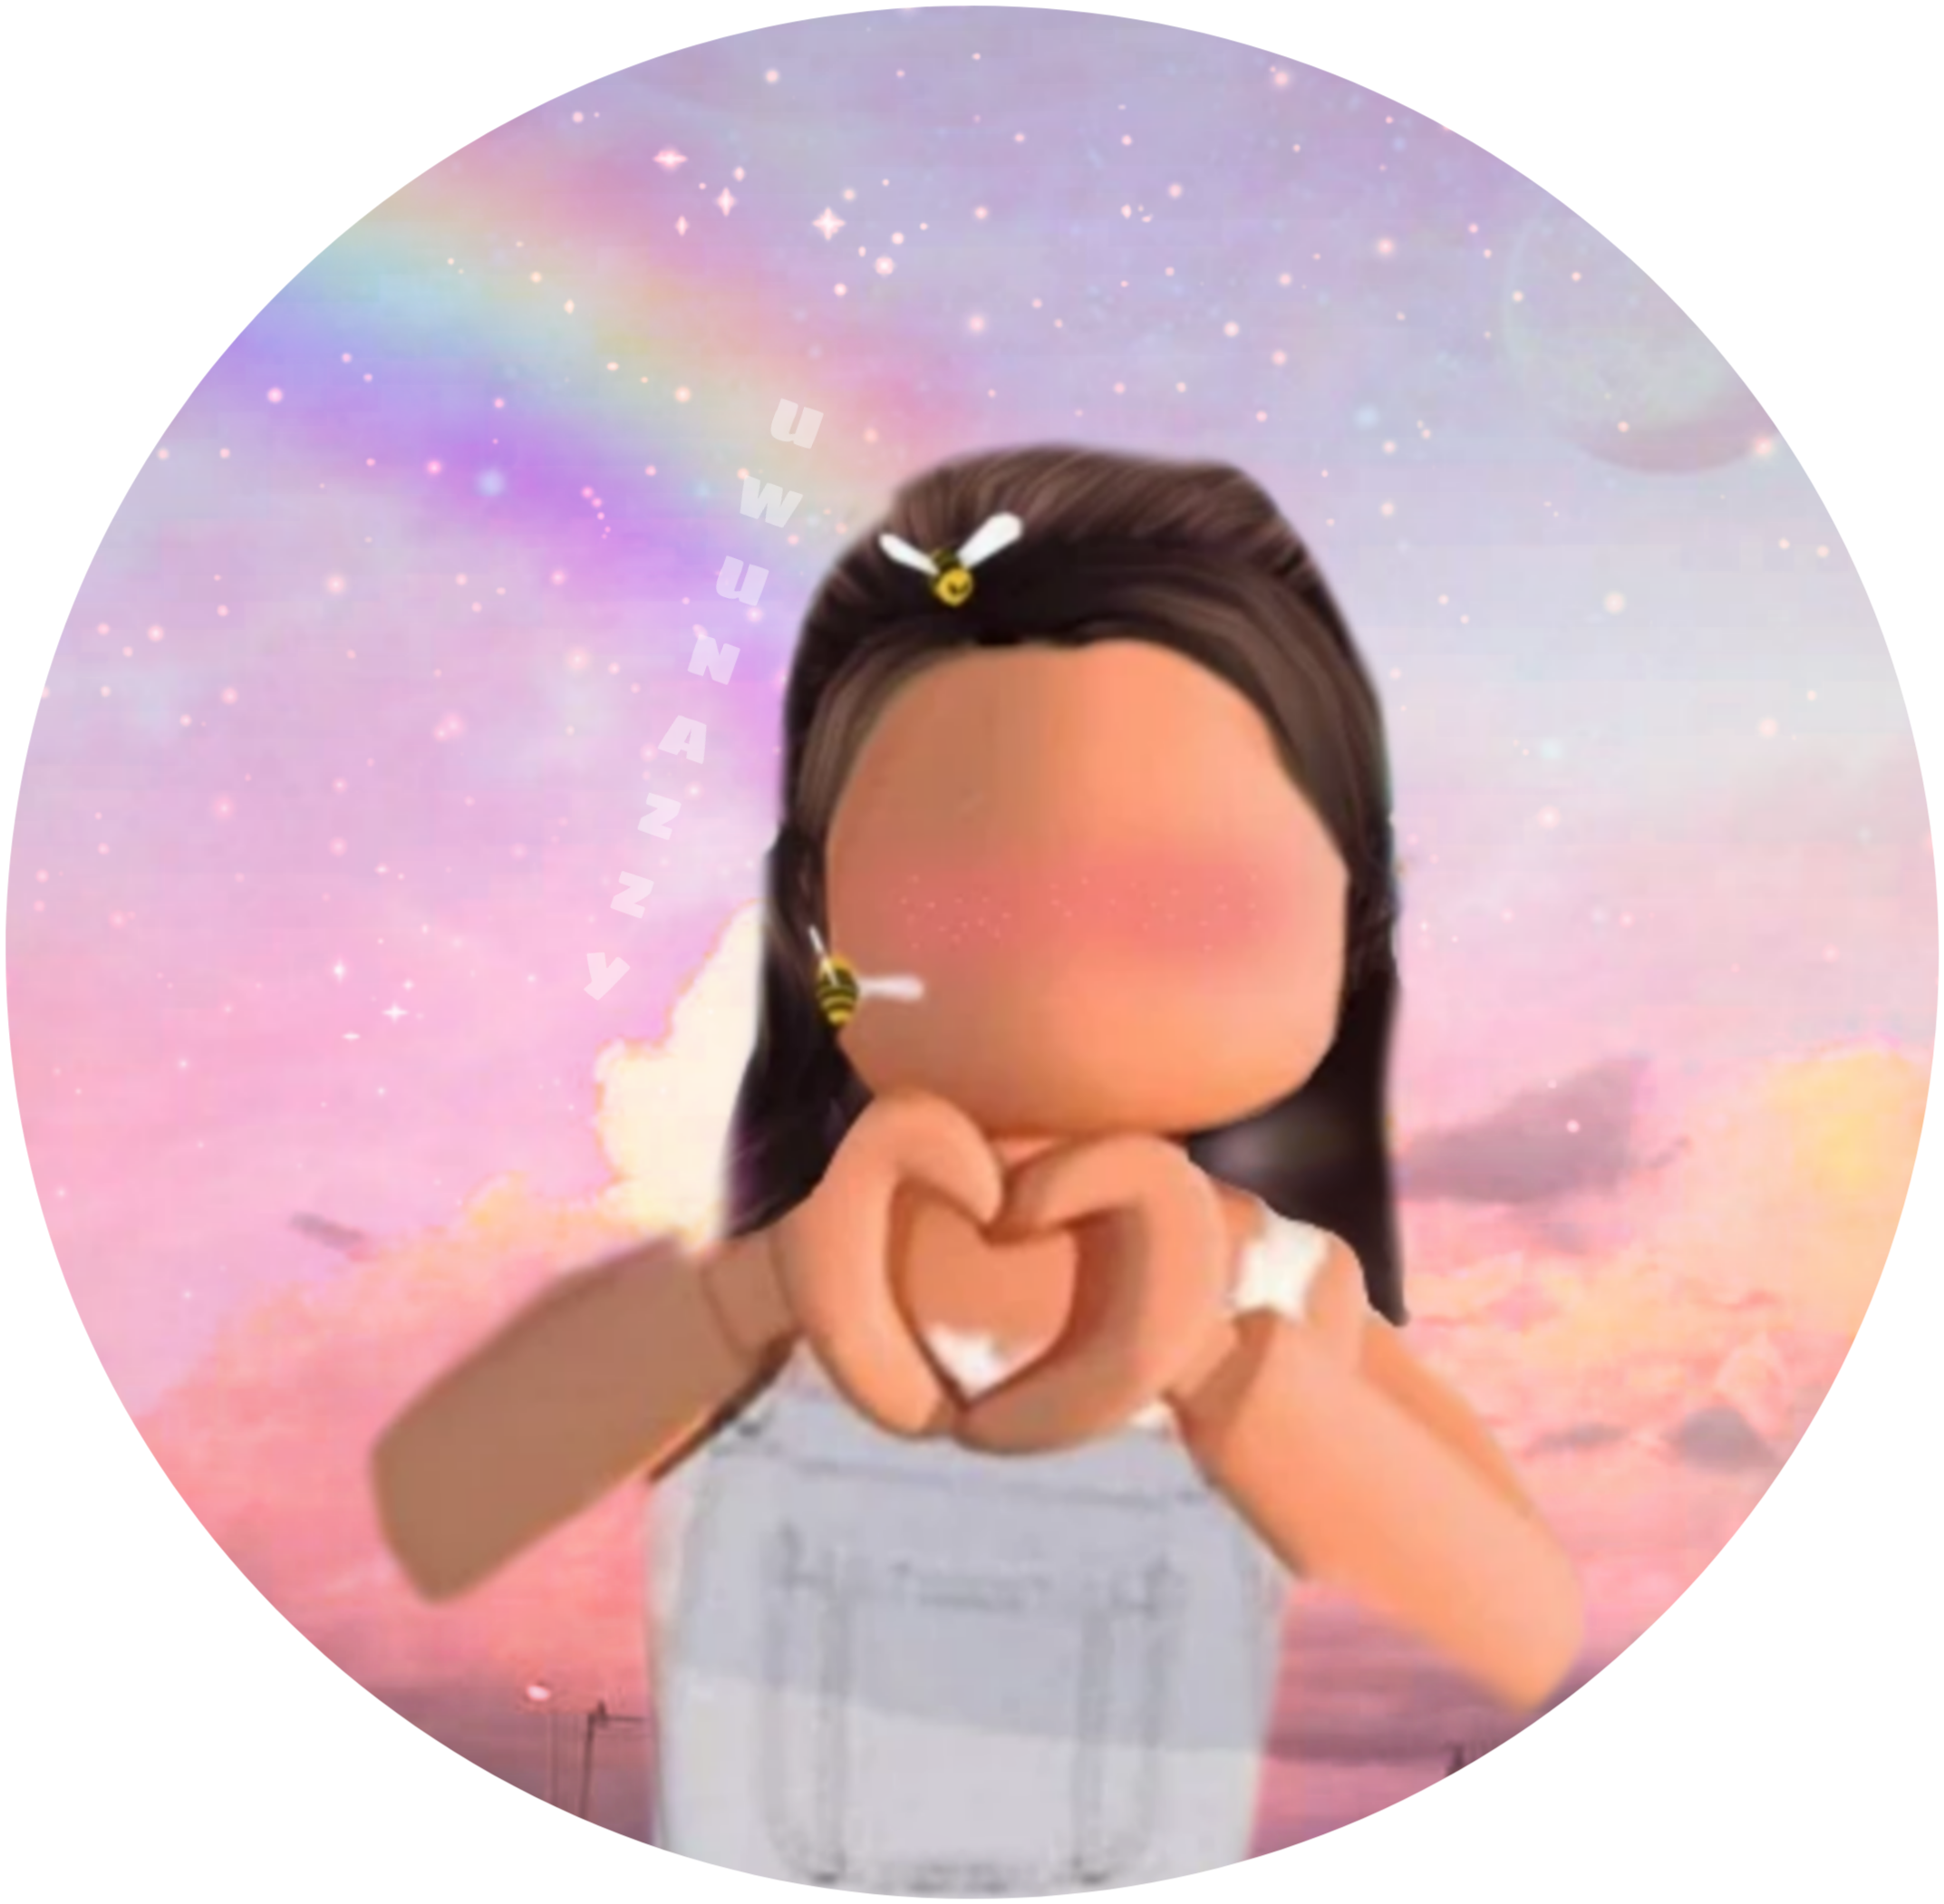 pfp freetoedit A little PFP I made#pfp sticker by @uwunazzy